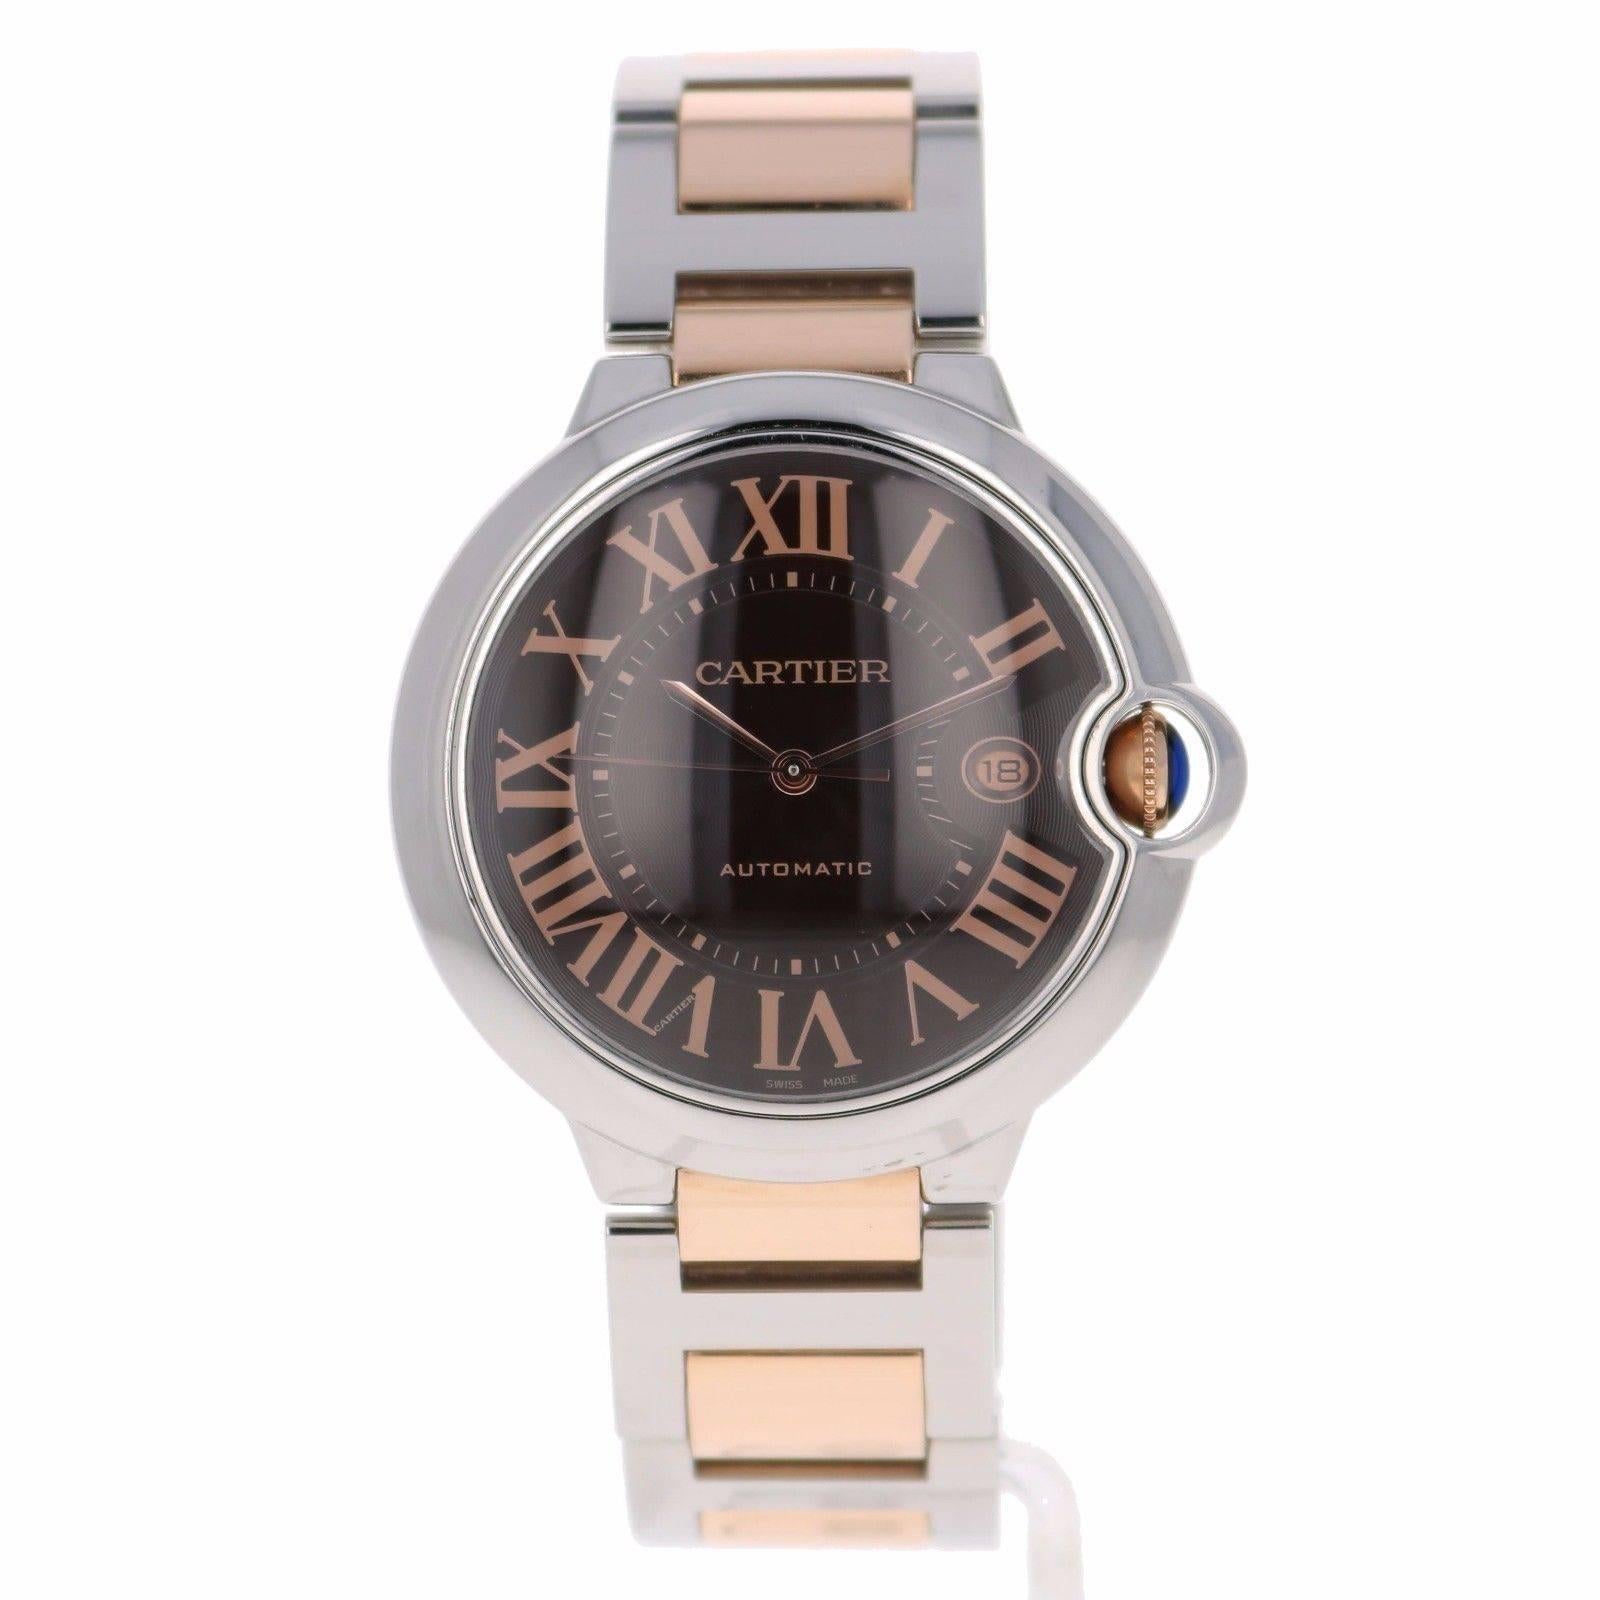 Brand Name 
Cartier 
Style Number 
W6920032 
Series 
Ballon Bleu 
Gender 
Unisex 
Case Material 
Stainless Steel + 18k Rose Gold 
Dial Color 
Chocolate Brown w/ Rose Roman Numerals 
Movement 
Automatic 
Engine 
Cartier Calibre 049 
Functions 
Hours,